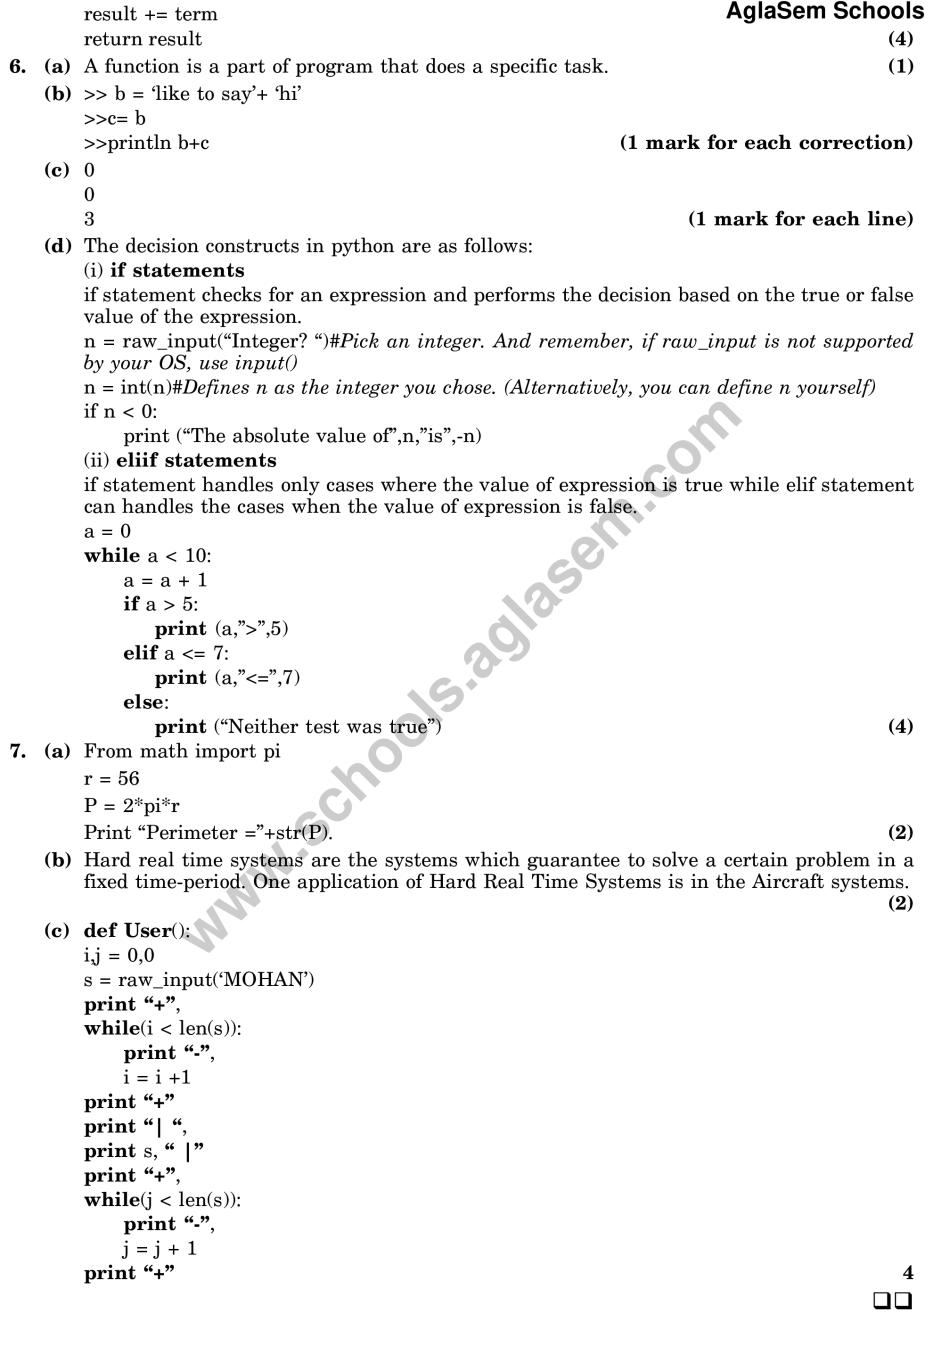 cbse class 11 computer science case study questions